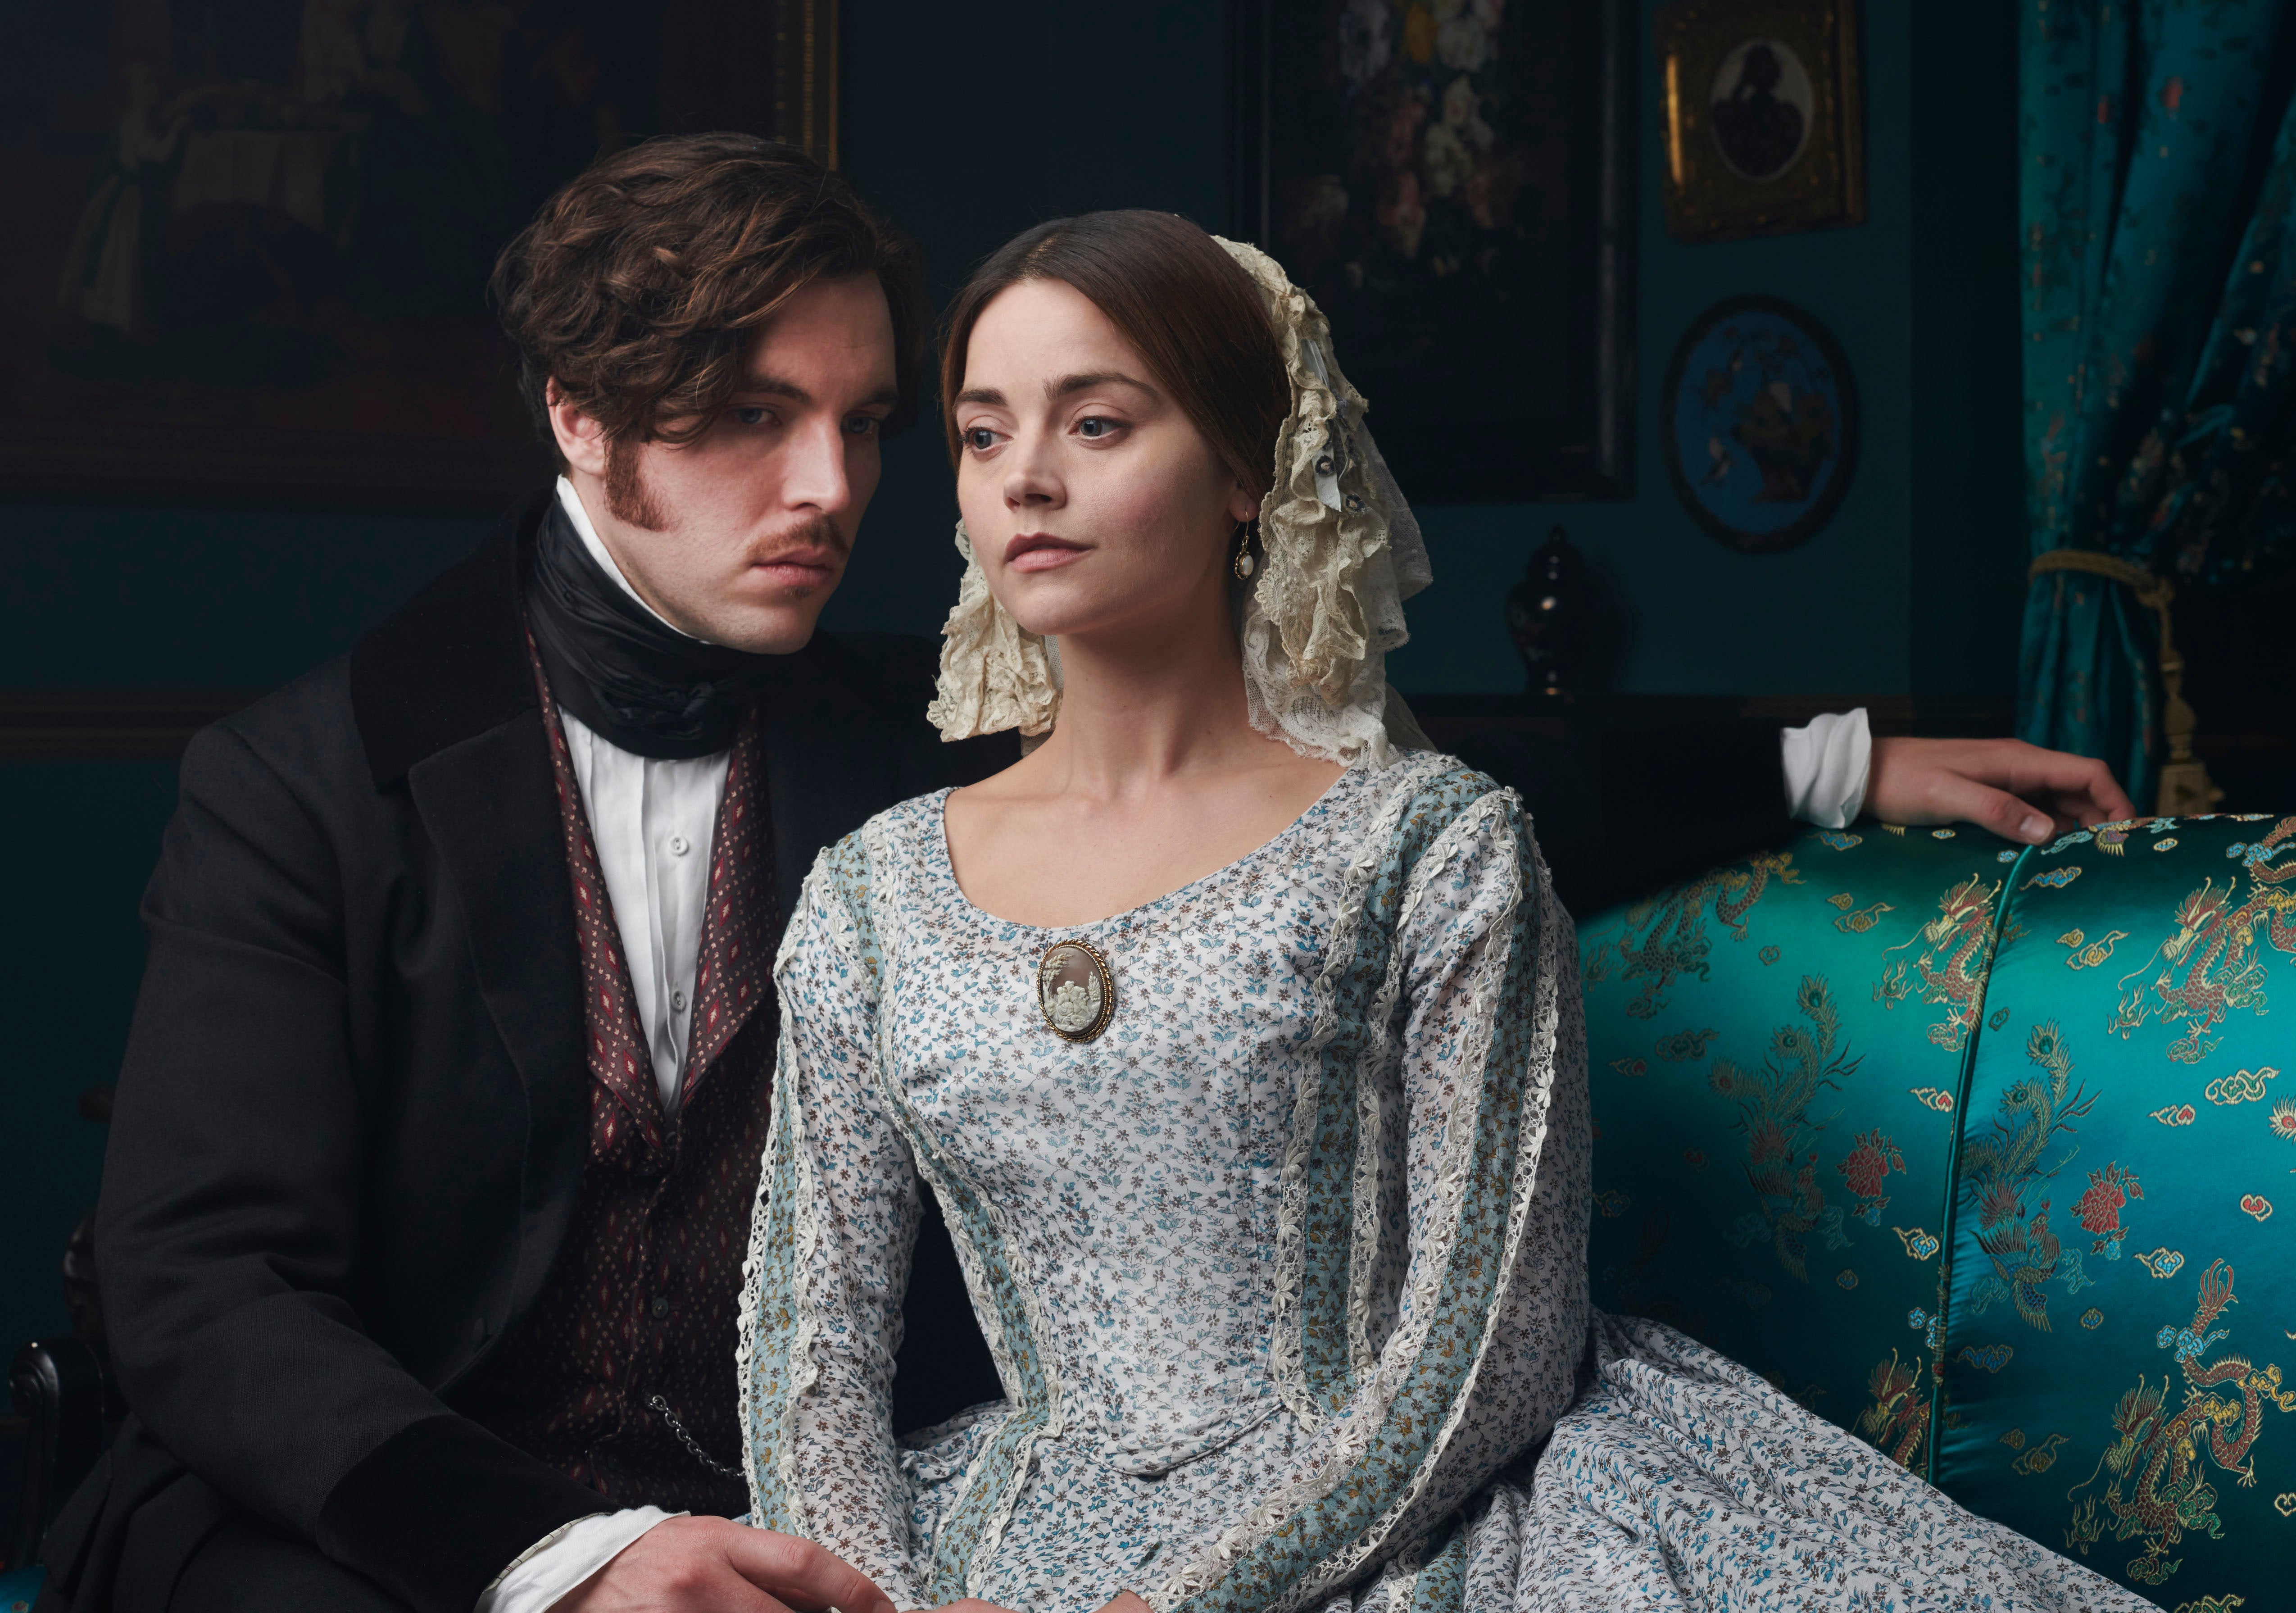 In love: Hughes as Prince Albert and Jenna Coleman as Victoria in ITV’s hit drama ‘Victoria’